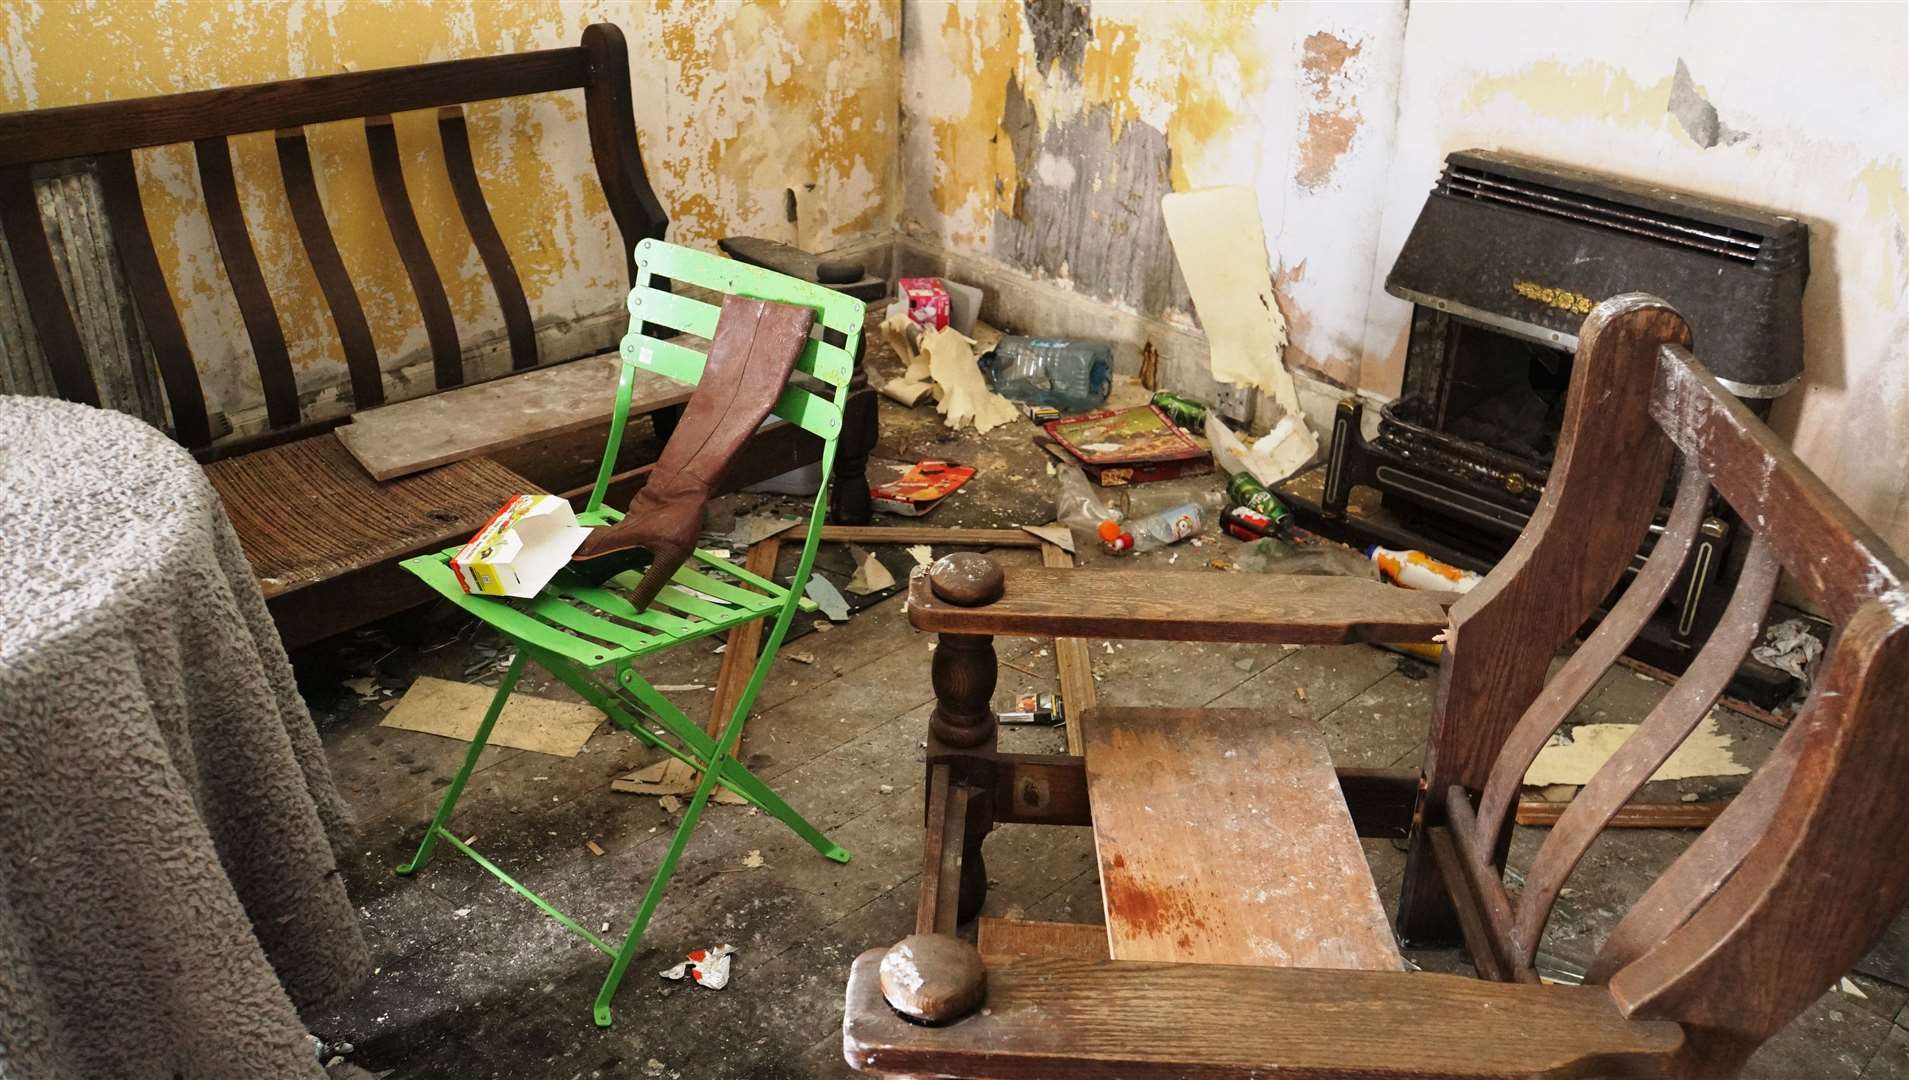 The owner was shocked when he returned from Italy to find his house wrecked by vandals. This image was taken in 2019 and the property has now been completely modernised inside. Picture: DGS